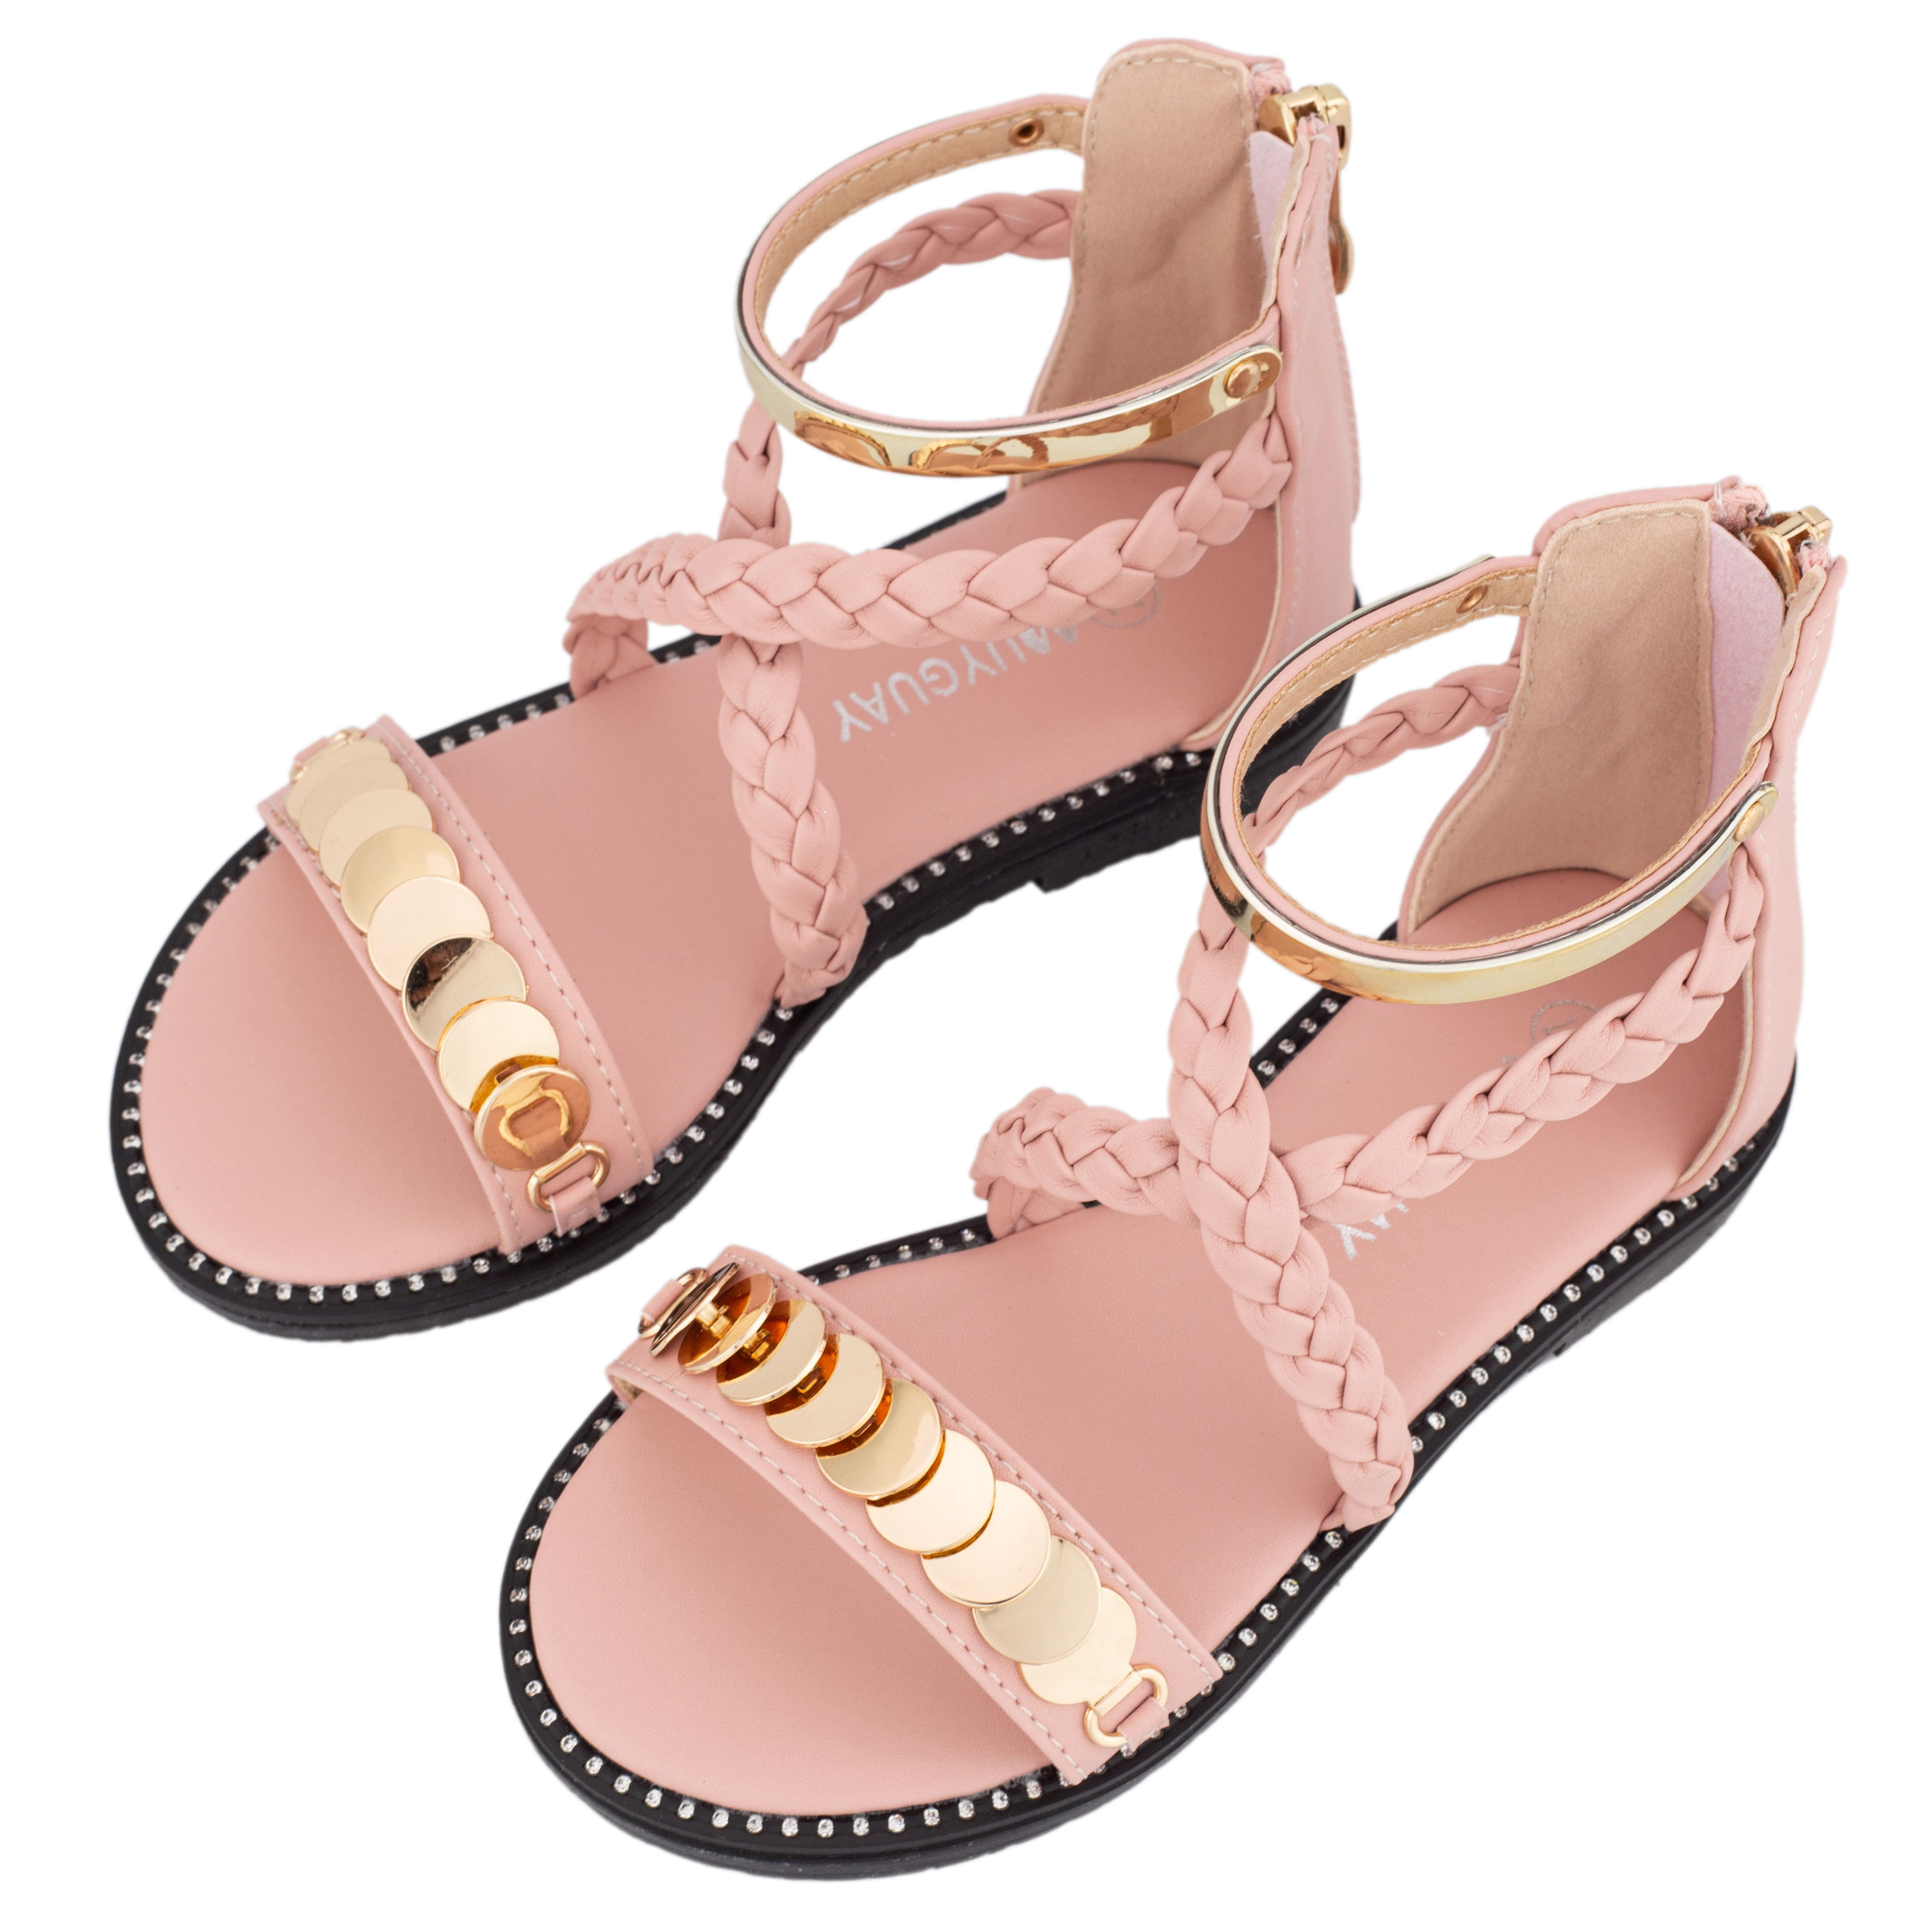 Girls Gladiator Sandals with Sequins Zipper Strappy Summer Shoes for Toddler/Little Girl